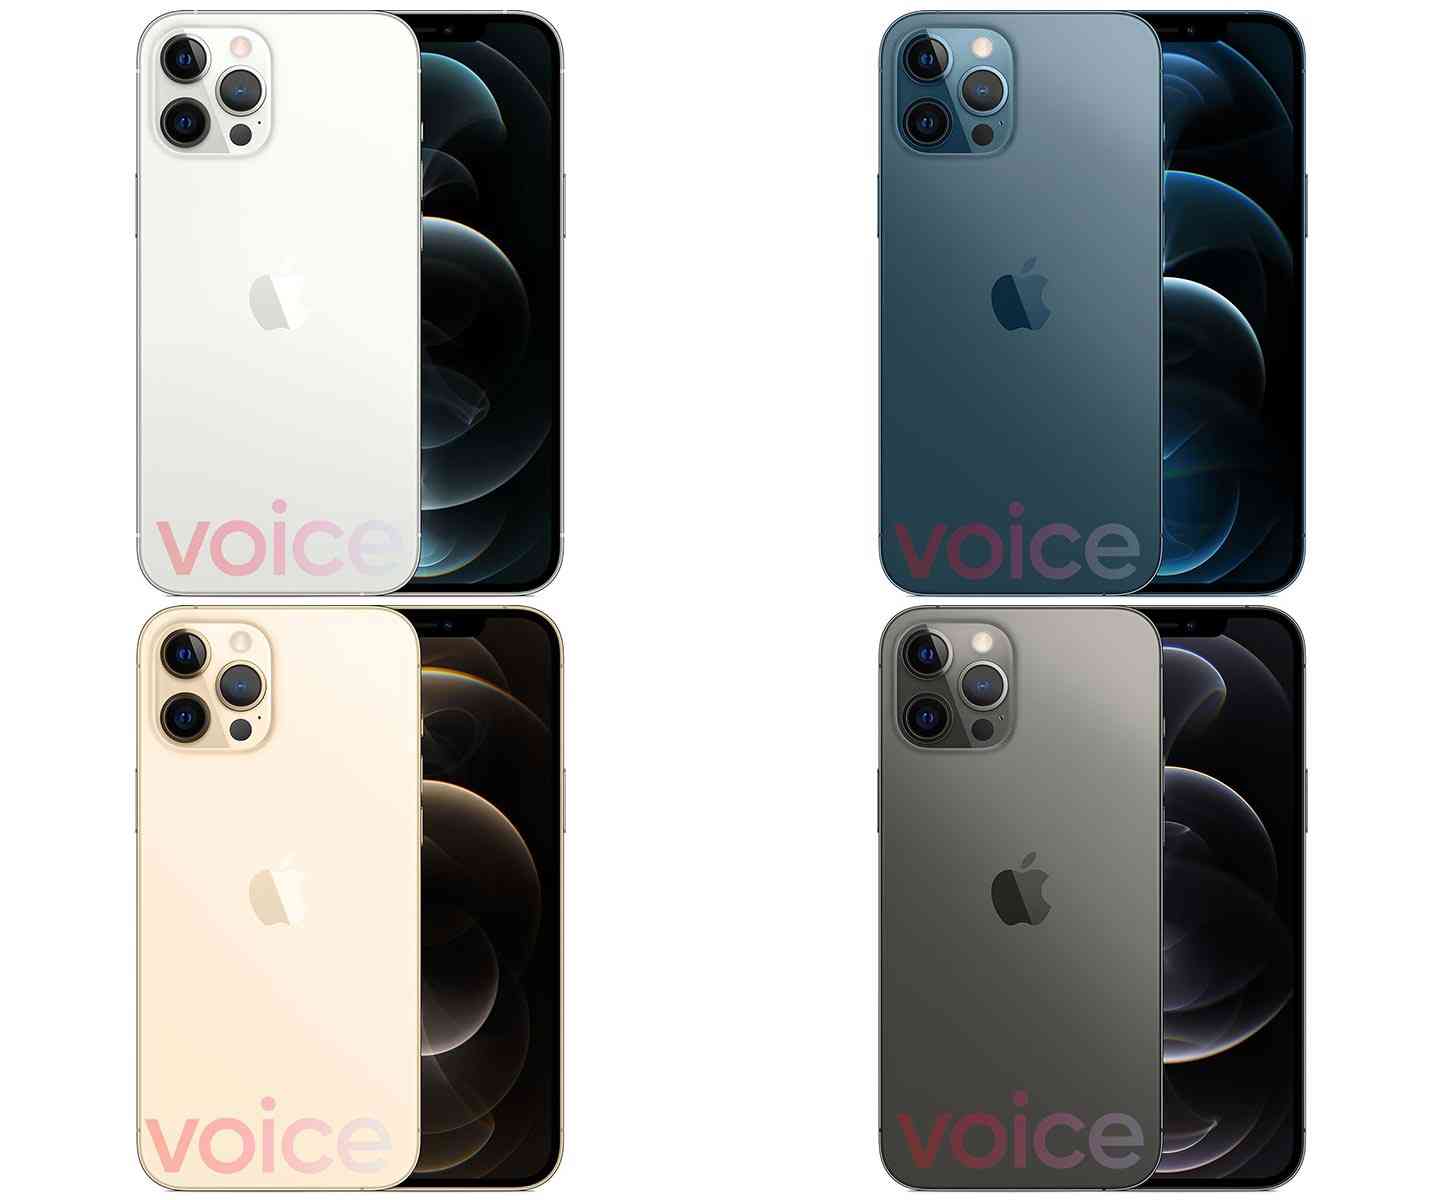 iPhone 12 Pro Max colors